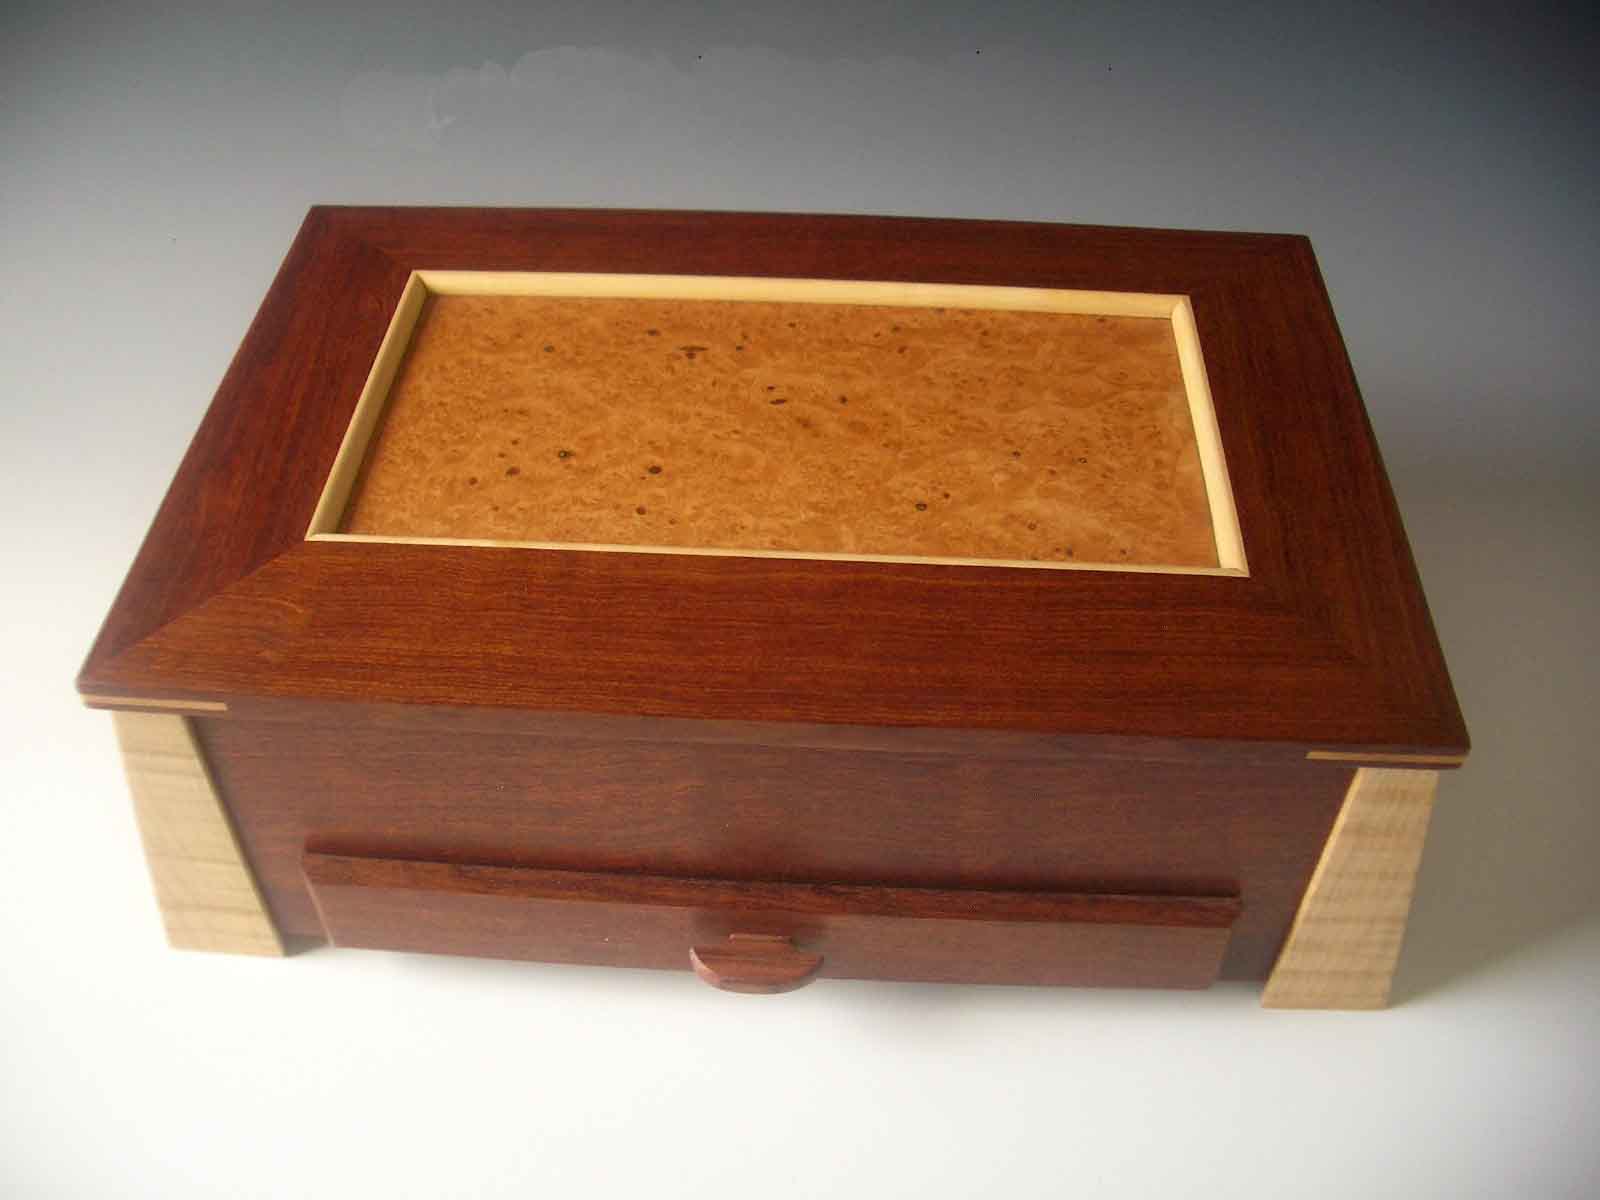 Box-shaped jewelry box with angled legs, a lid that lifts up and a drawer that pulls out